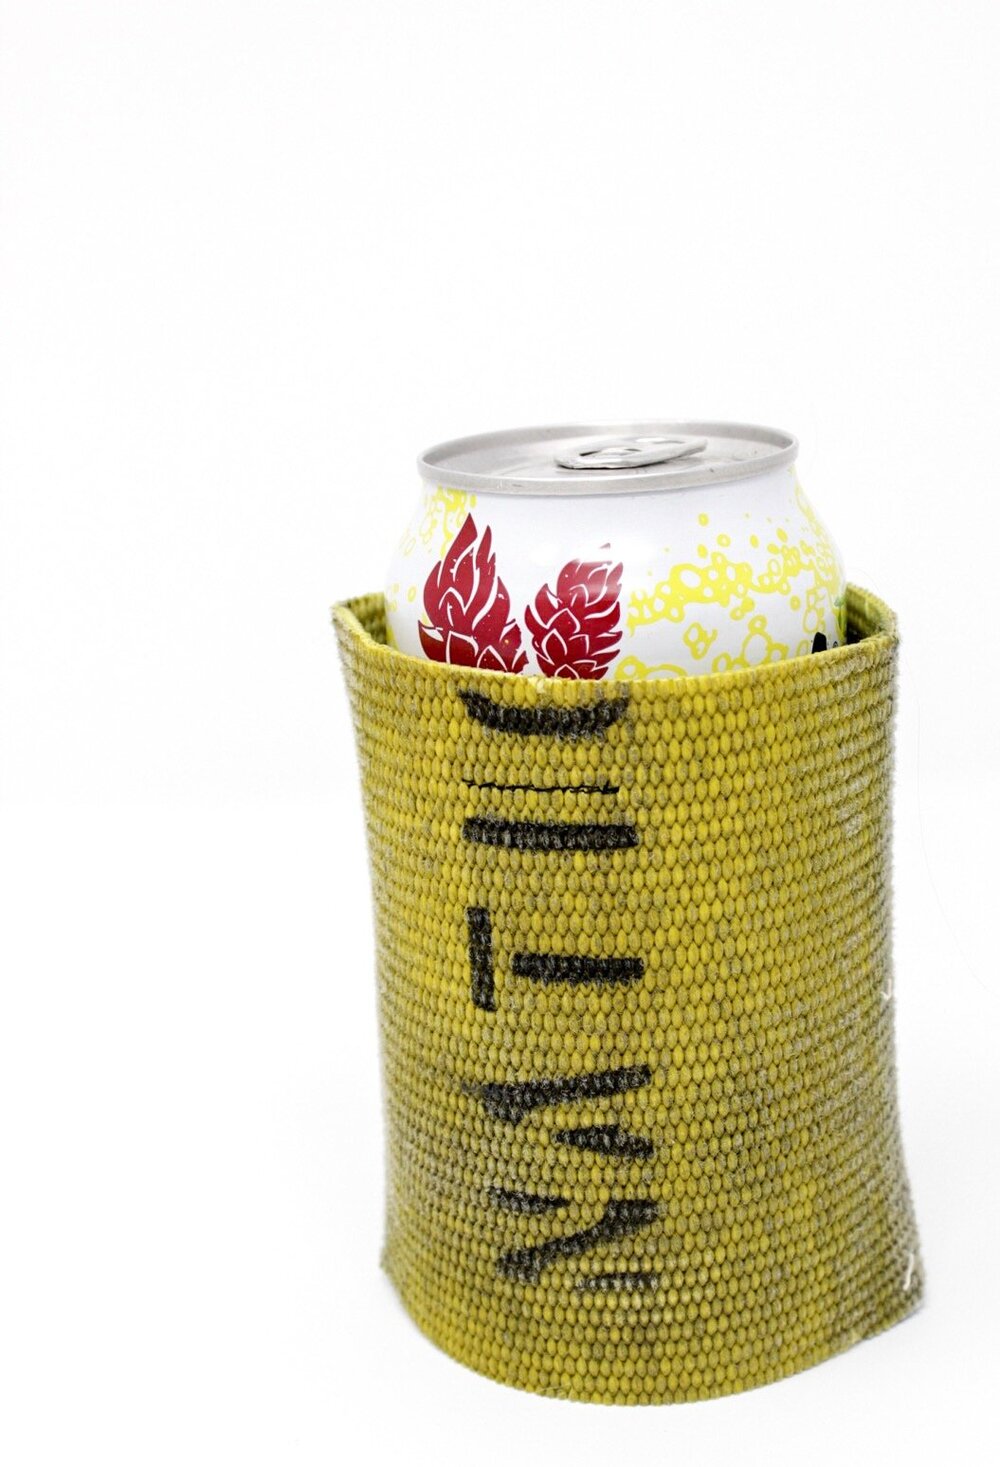 Fire Department Gifts: Firefighter Fire Hose Can Cooler: Yellow Gift